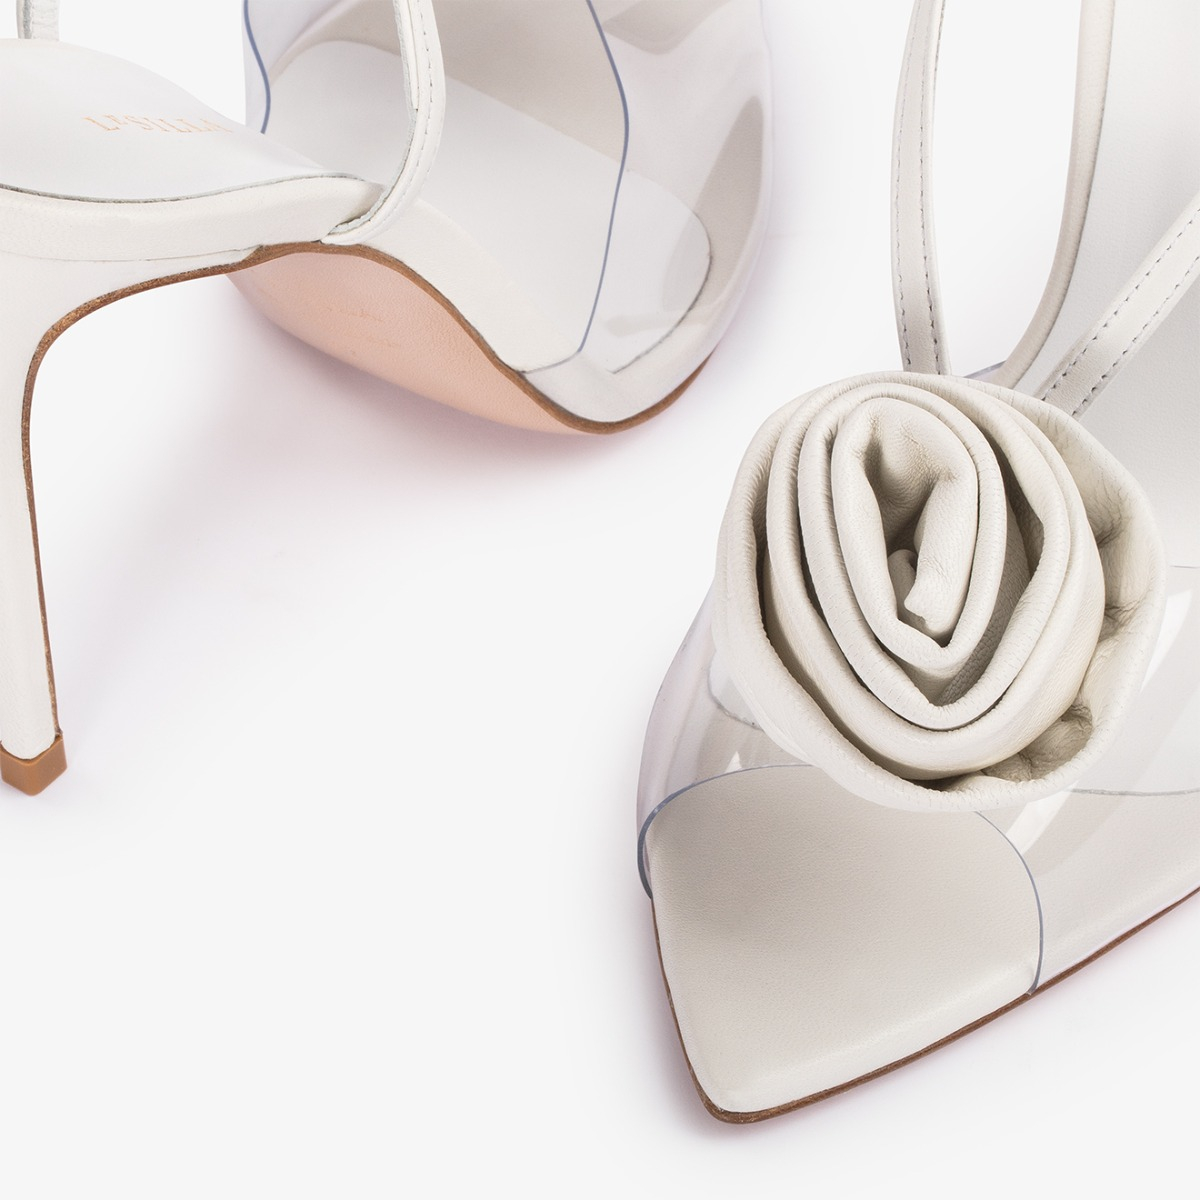 SLINGBACK ROSE 110 mm - Le Silla | Official Online Store